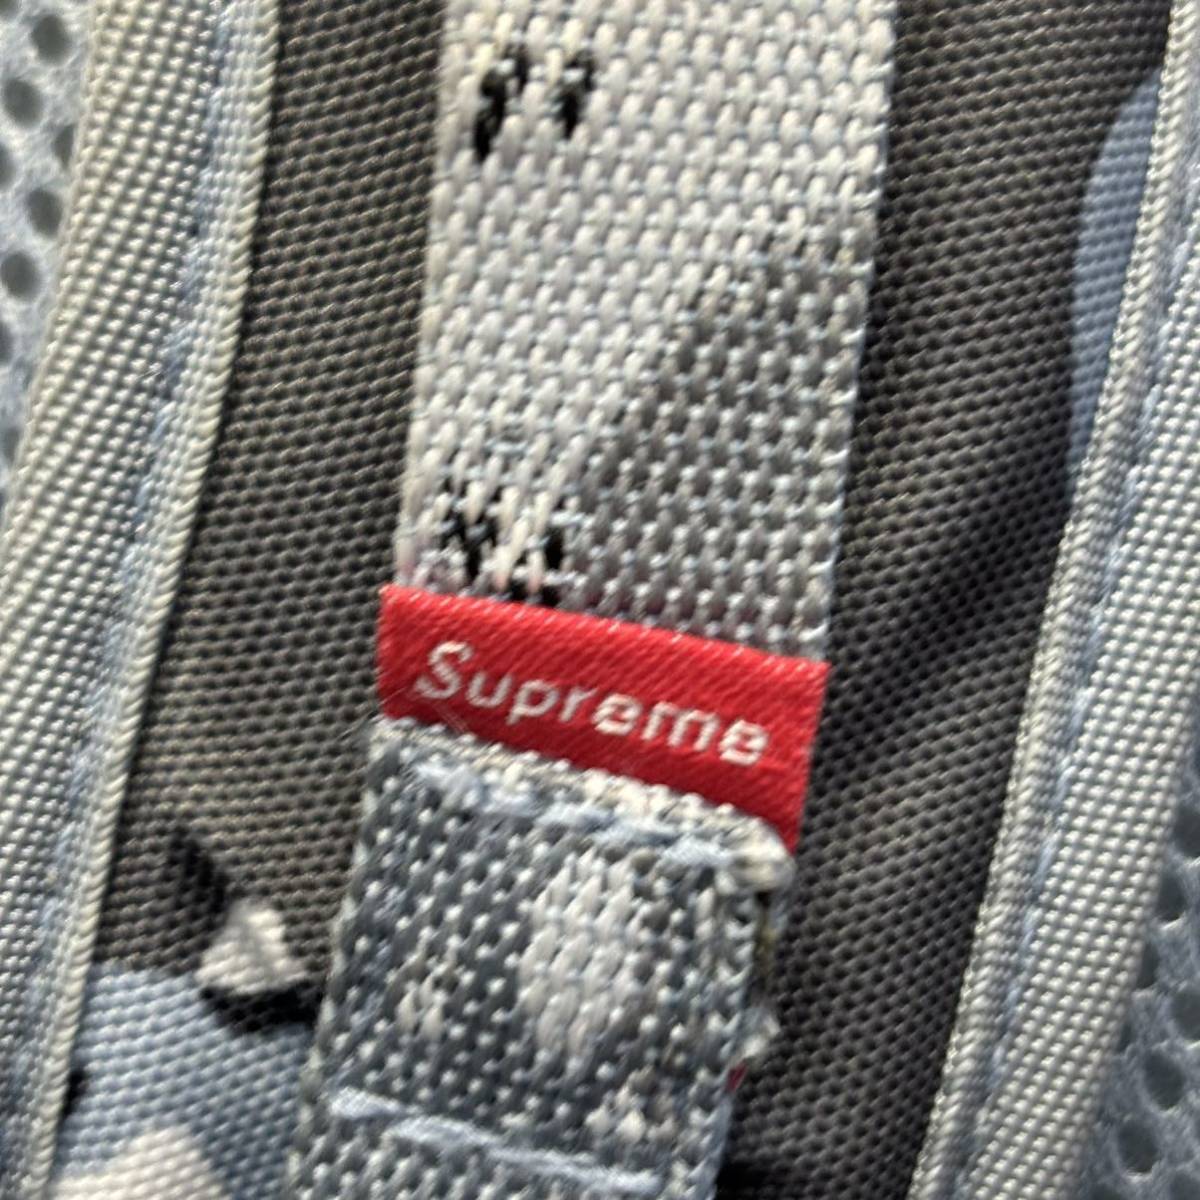 Supreme 20SS Back Pack Blue Chocolate Chip シュプリーム 20SS バックパック ブルー チョコレート チップ size FREE_画像4